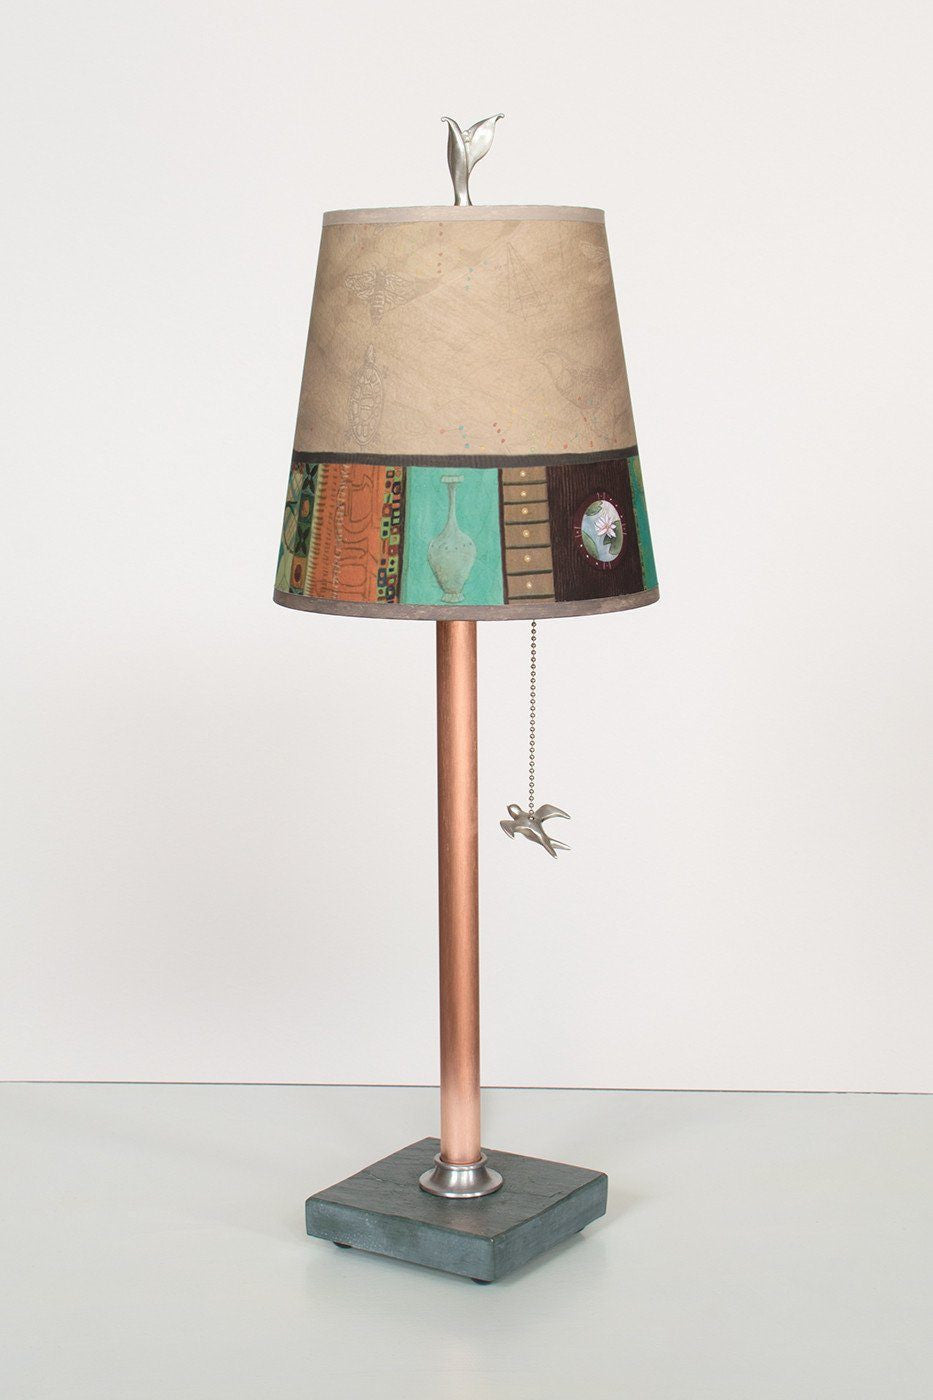 Janna Ugone & Co Table Lamps Copper Table Lamp with Small Drum Shade in Linen Match